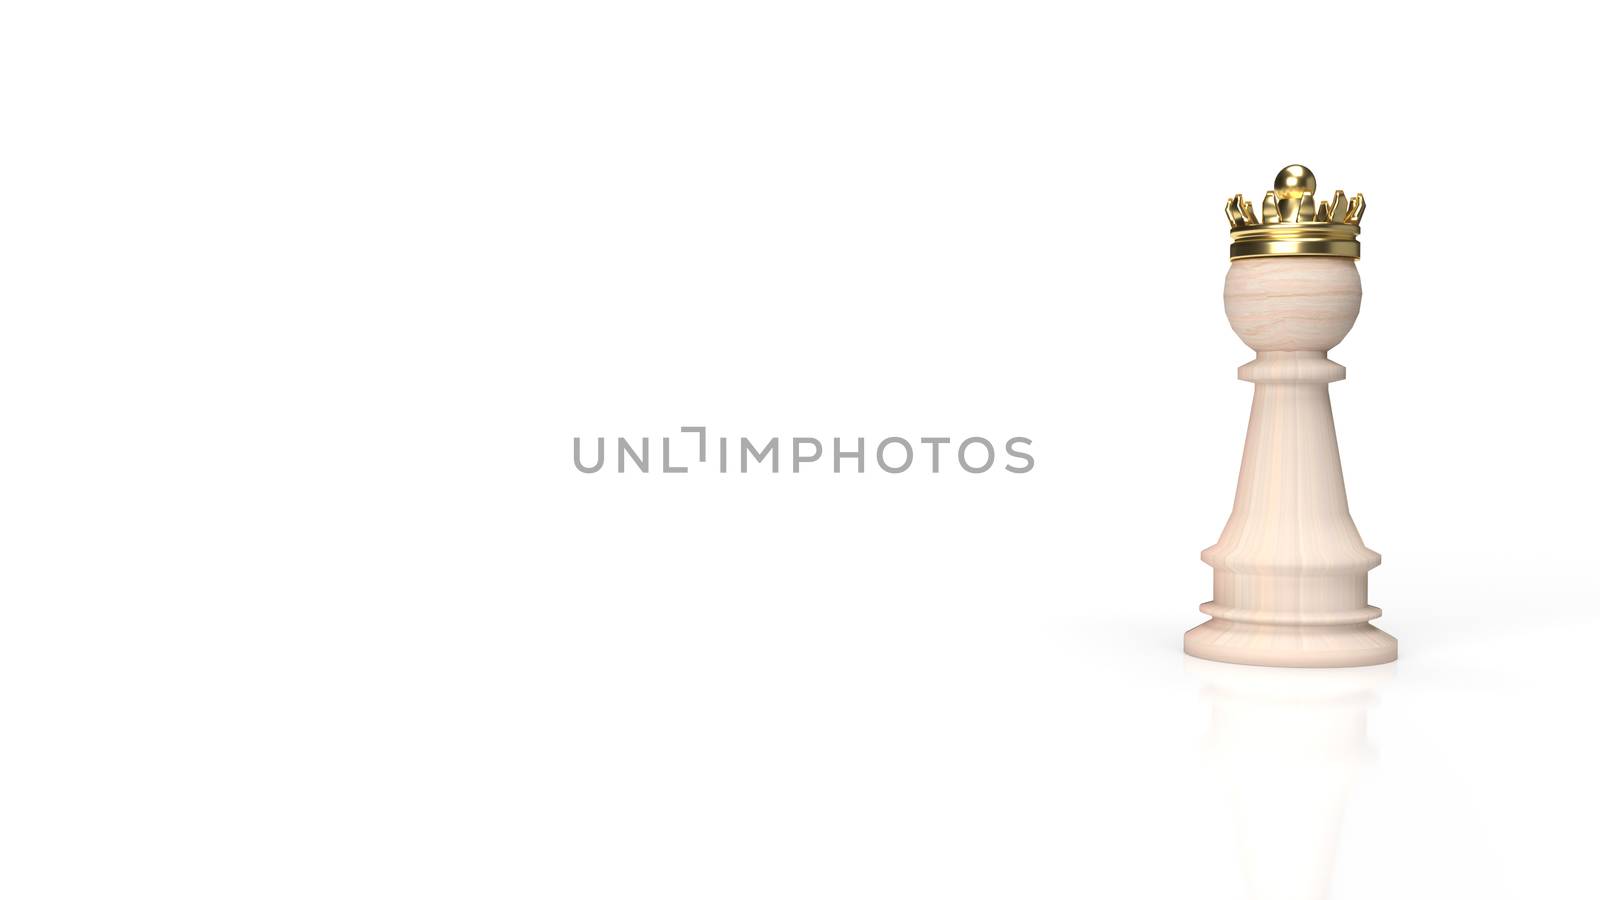 The wood chess and gold crown on white background for business c by Niphon_13